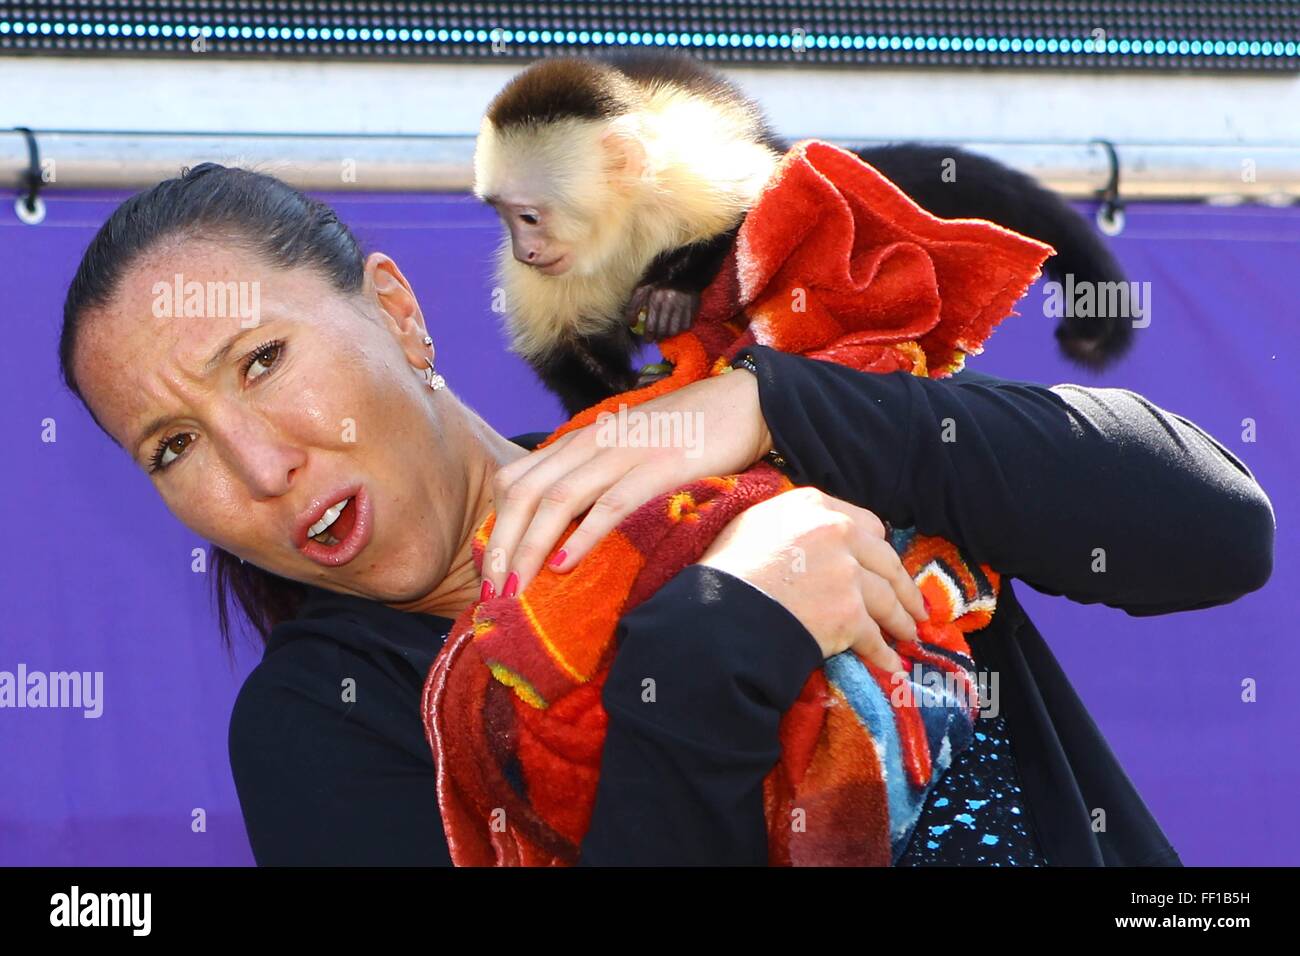 Beijing, China. 10th Feb, 2016. Player Jelena Jankovic of Serbia poses for a photo with a monkey during the 2013 Sony Open Tennis in Florida, the United States, March 26, 2013. 2016 marks the Year of the Monkey in the Chinese calender. Clever monkeys often bring unexpected entertainment spirit to the sport arena. © Xinhua/Alamy Live News Stock Photo